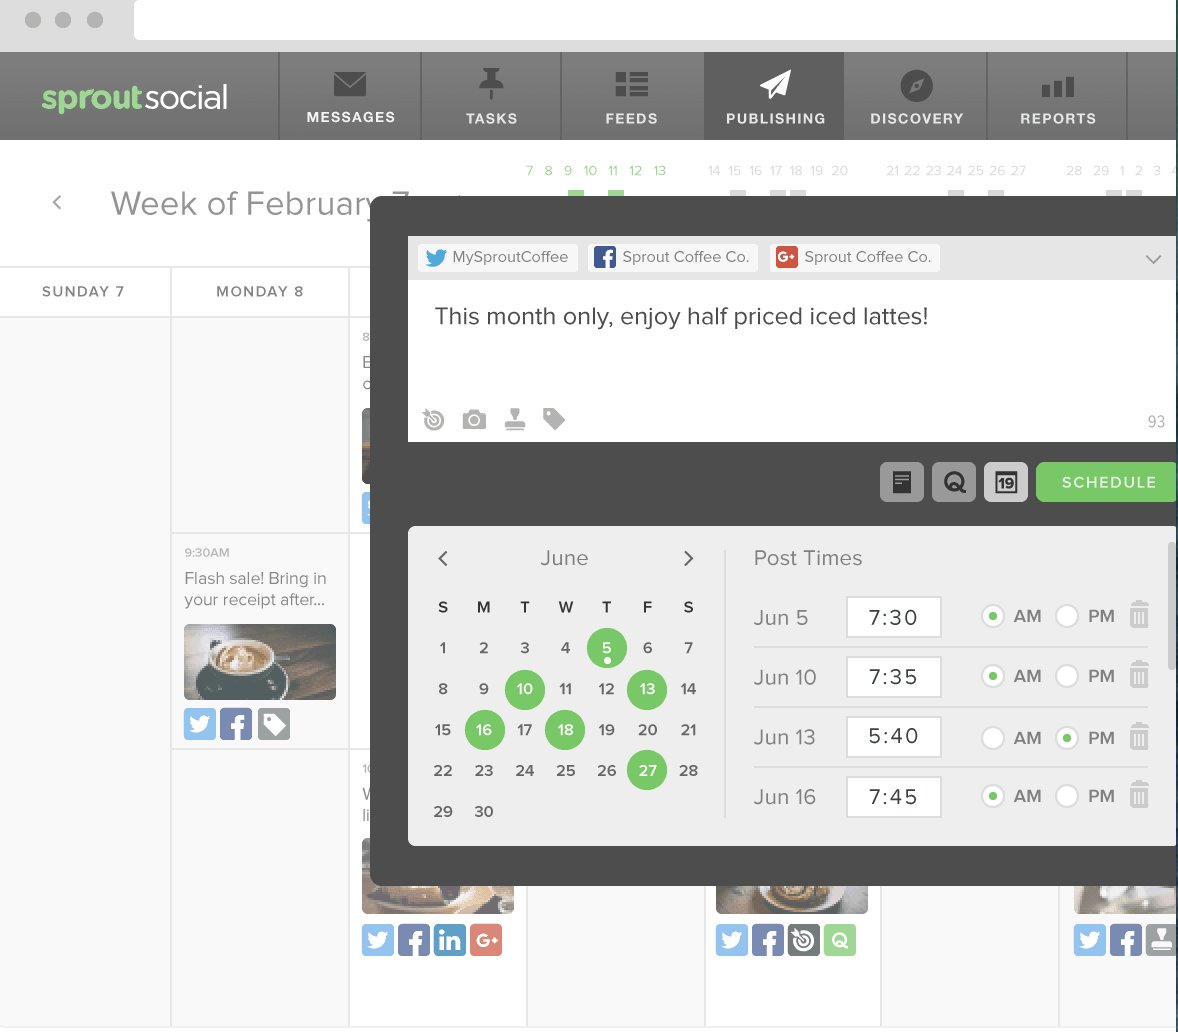 Sprout Social Manage Social Media Messages Anywhere, Anytime